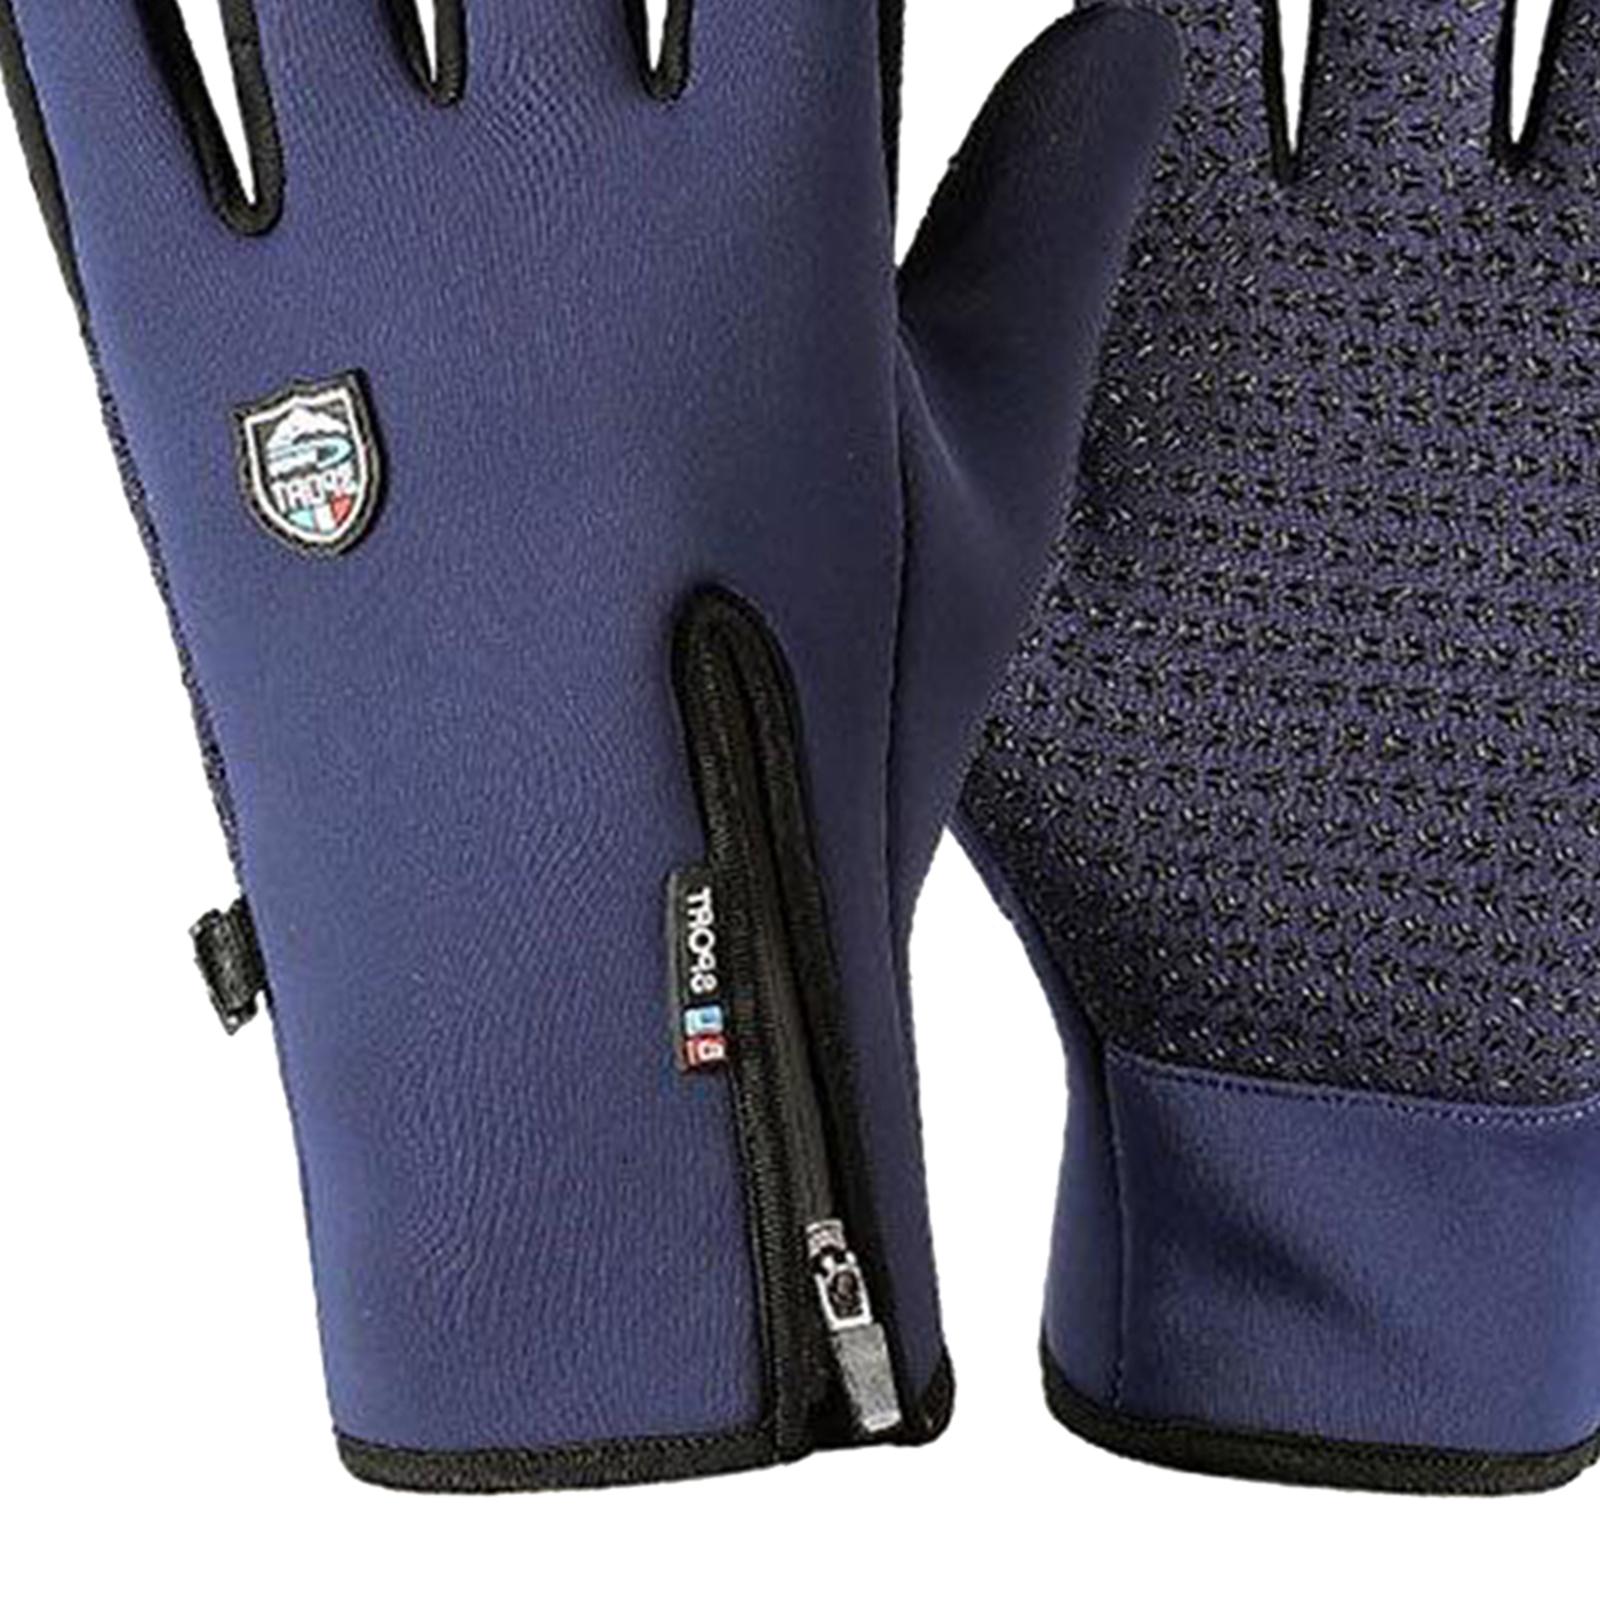 Winter Outdoor Cycling Hiking Sports Gloves Touch Screen XL Navy Blue K146